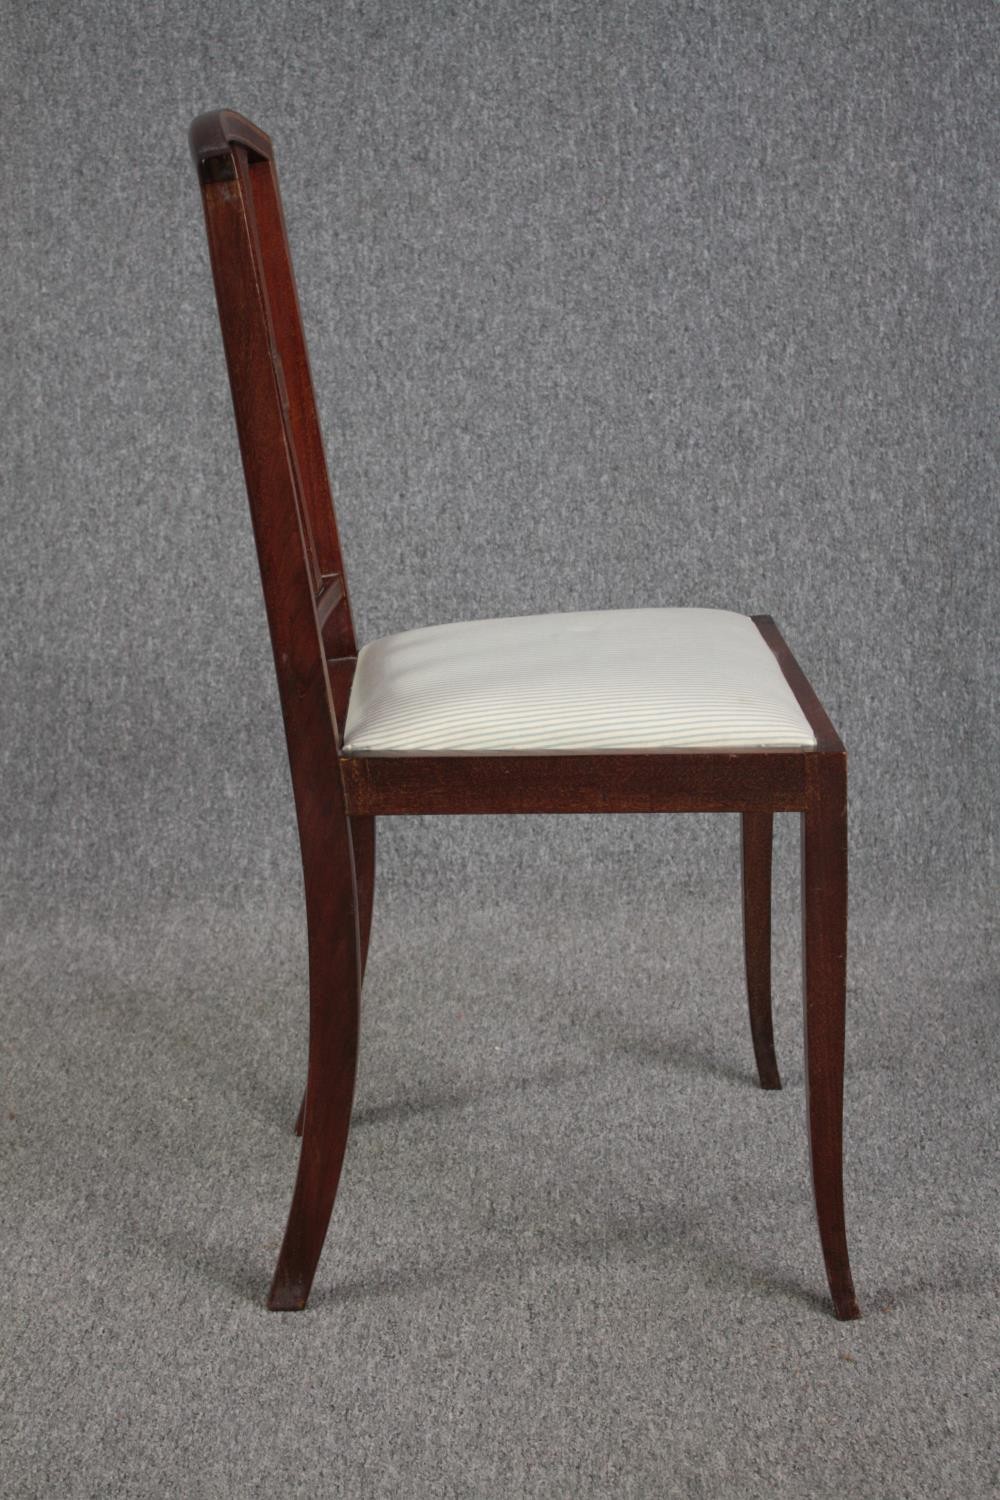 Dining chair, Edwardian mahogany with satinwood inlay. - Image 3 of 5